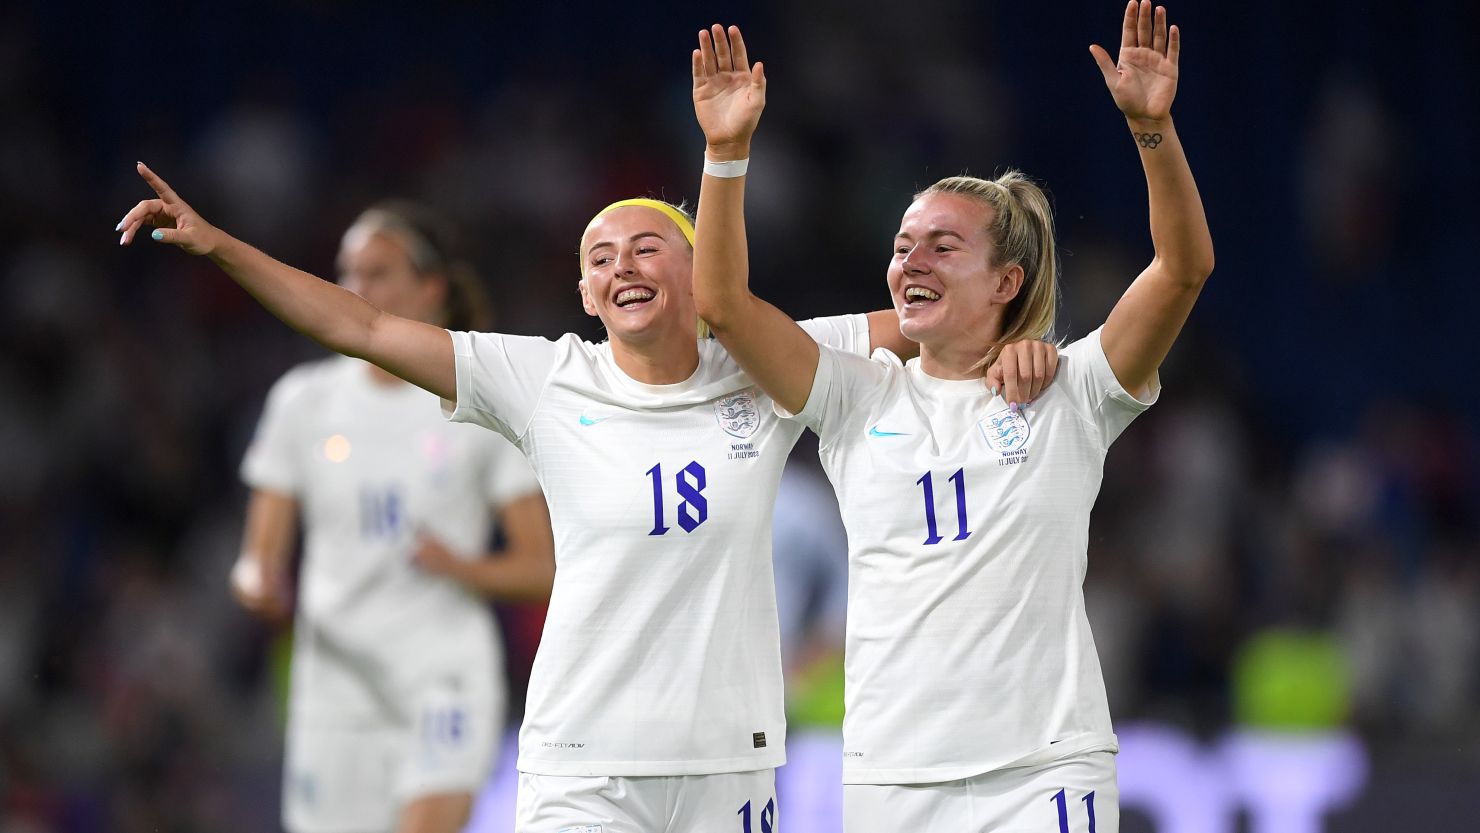 Chloe Kelly and Lauren Hemp celebrate following the victory over Norway.